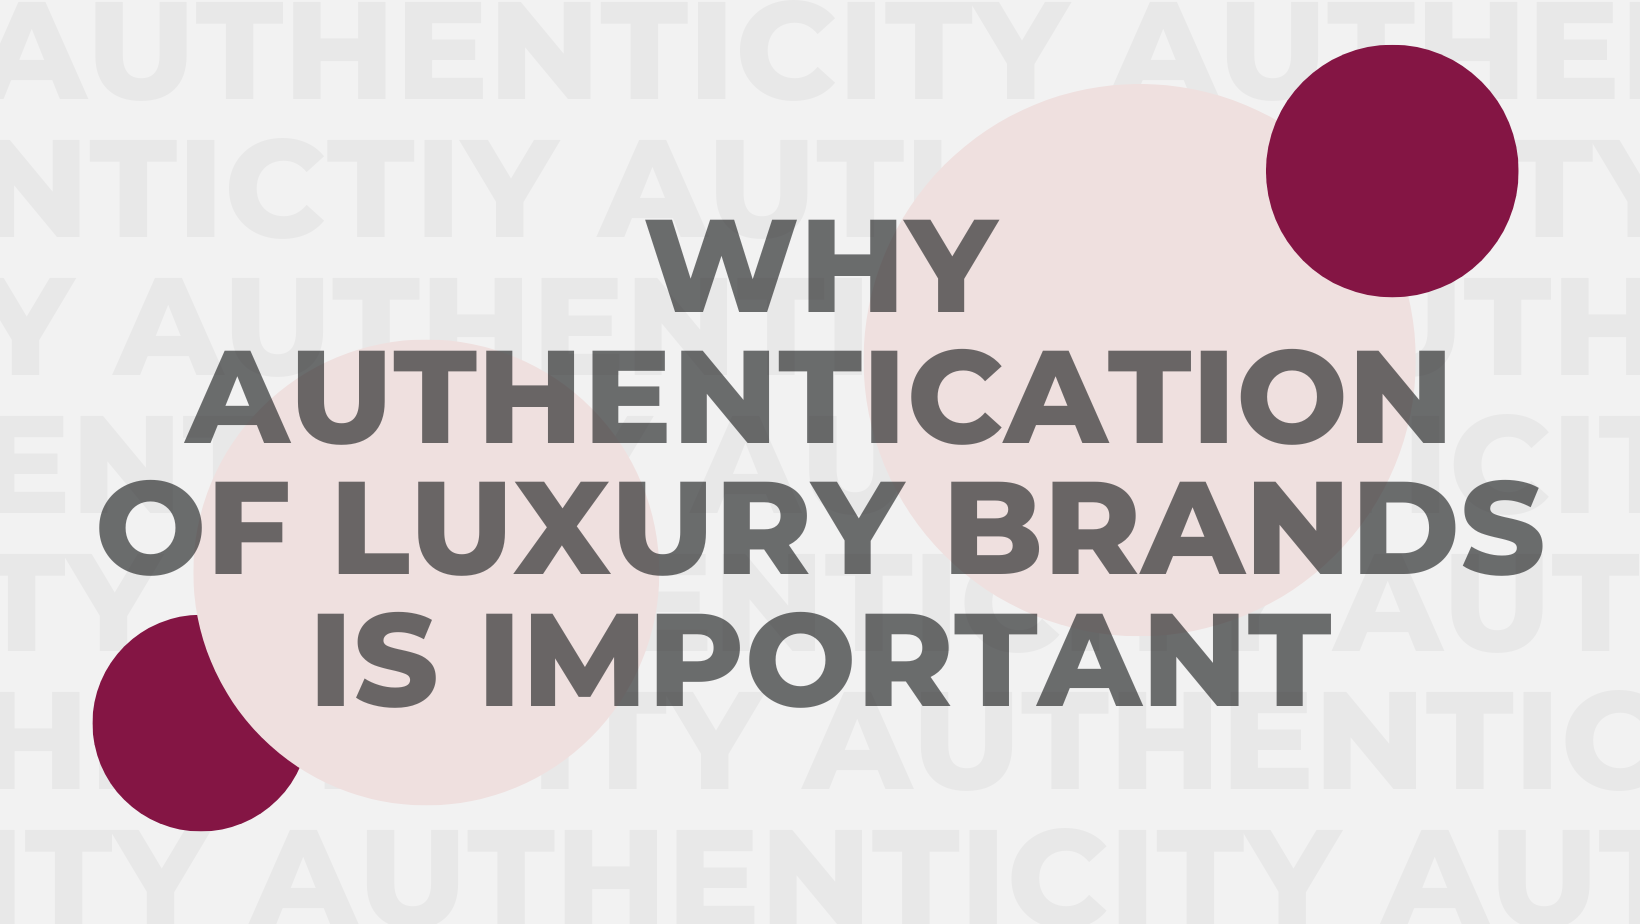 Why Authentication of Luxury Brands is Important